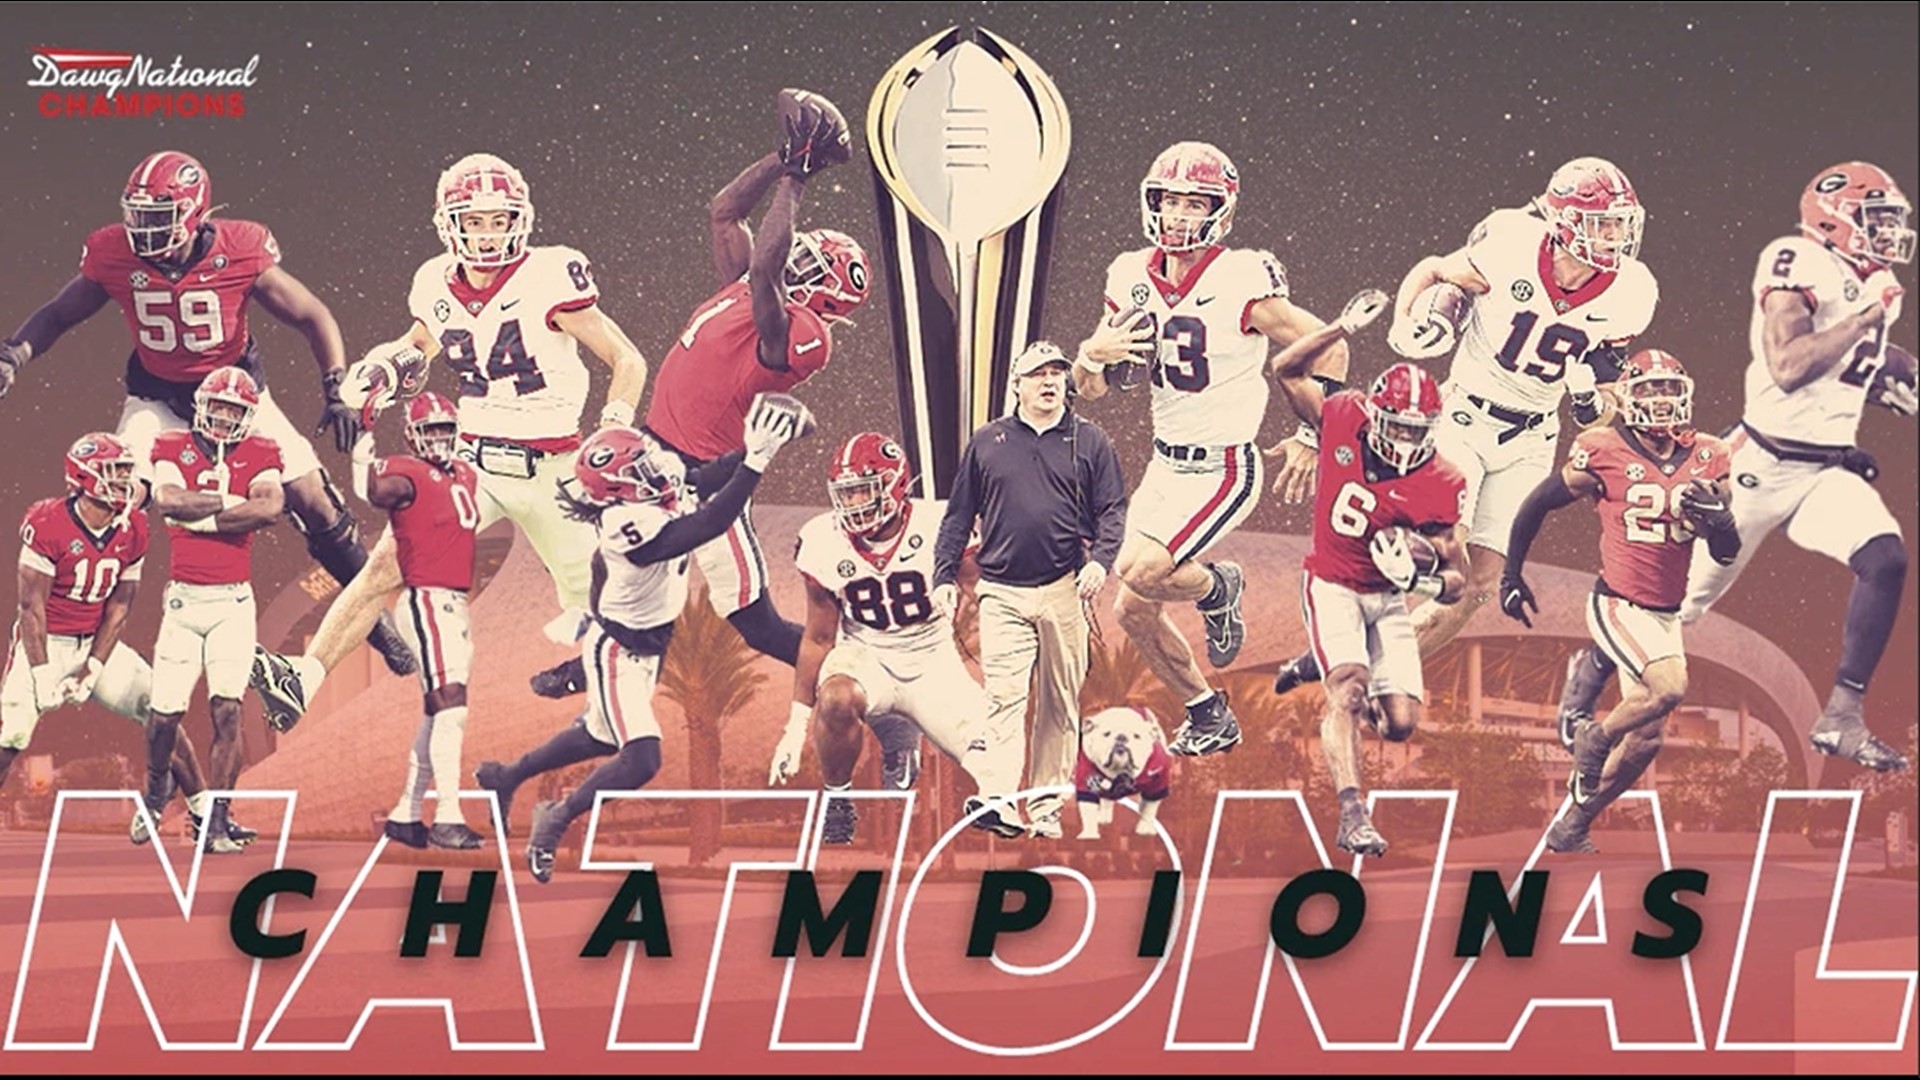 GO DAWGS! Congrats to the University of Georgia on their 2nd consecutive National Championship.